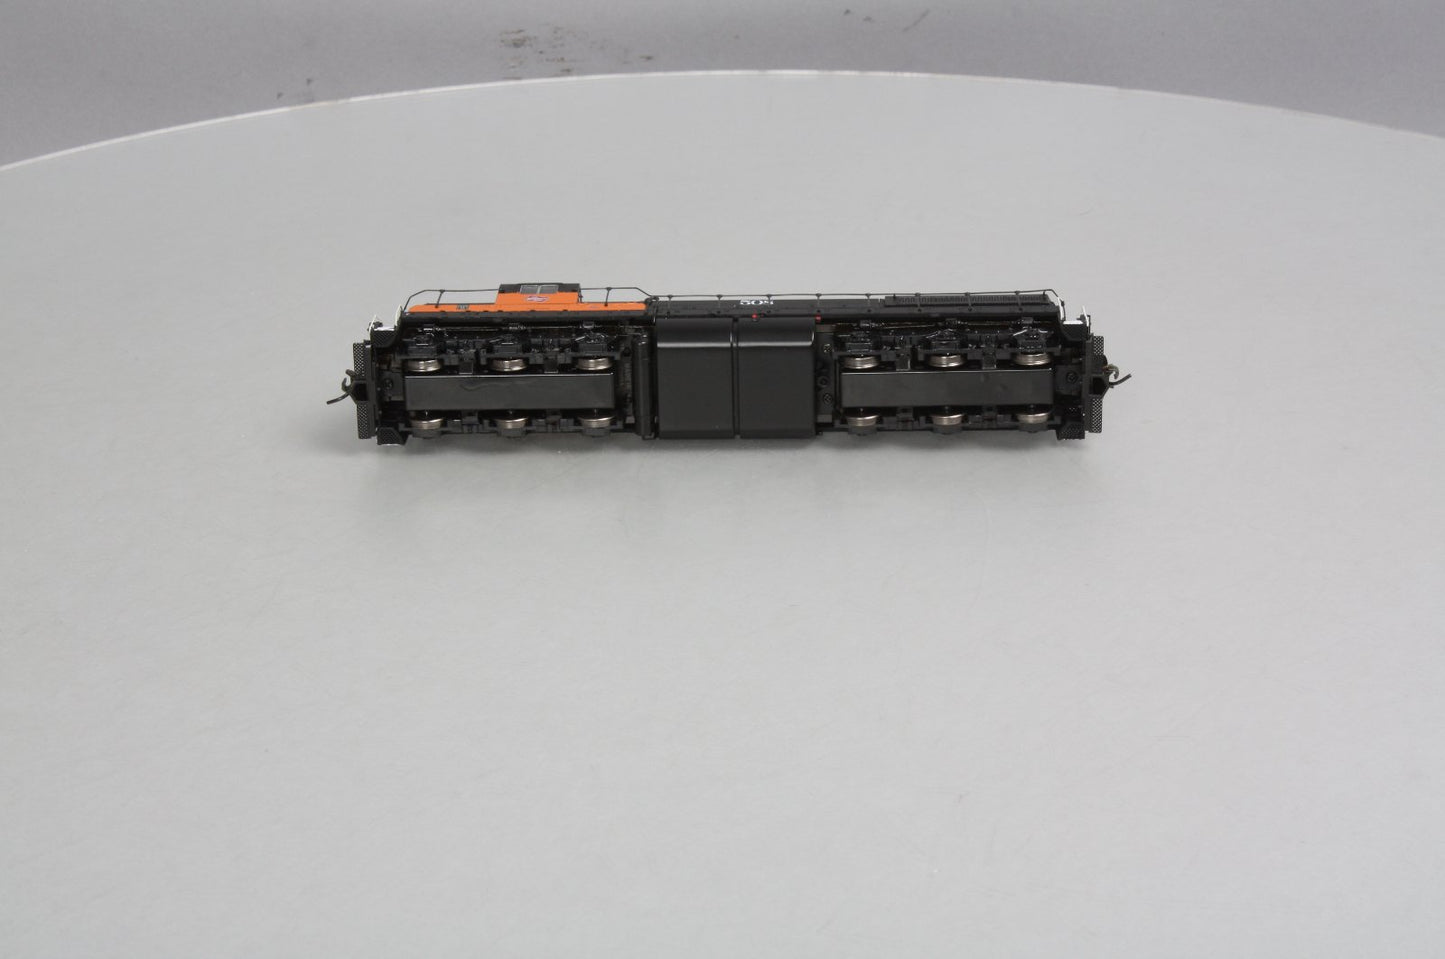 Broadway Limited 5020 HO Milwaukee Road EMD SD9 #508 with Sound